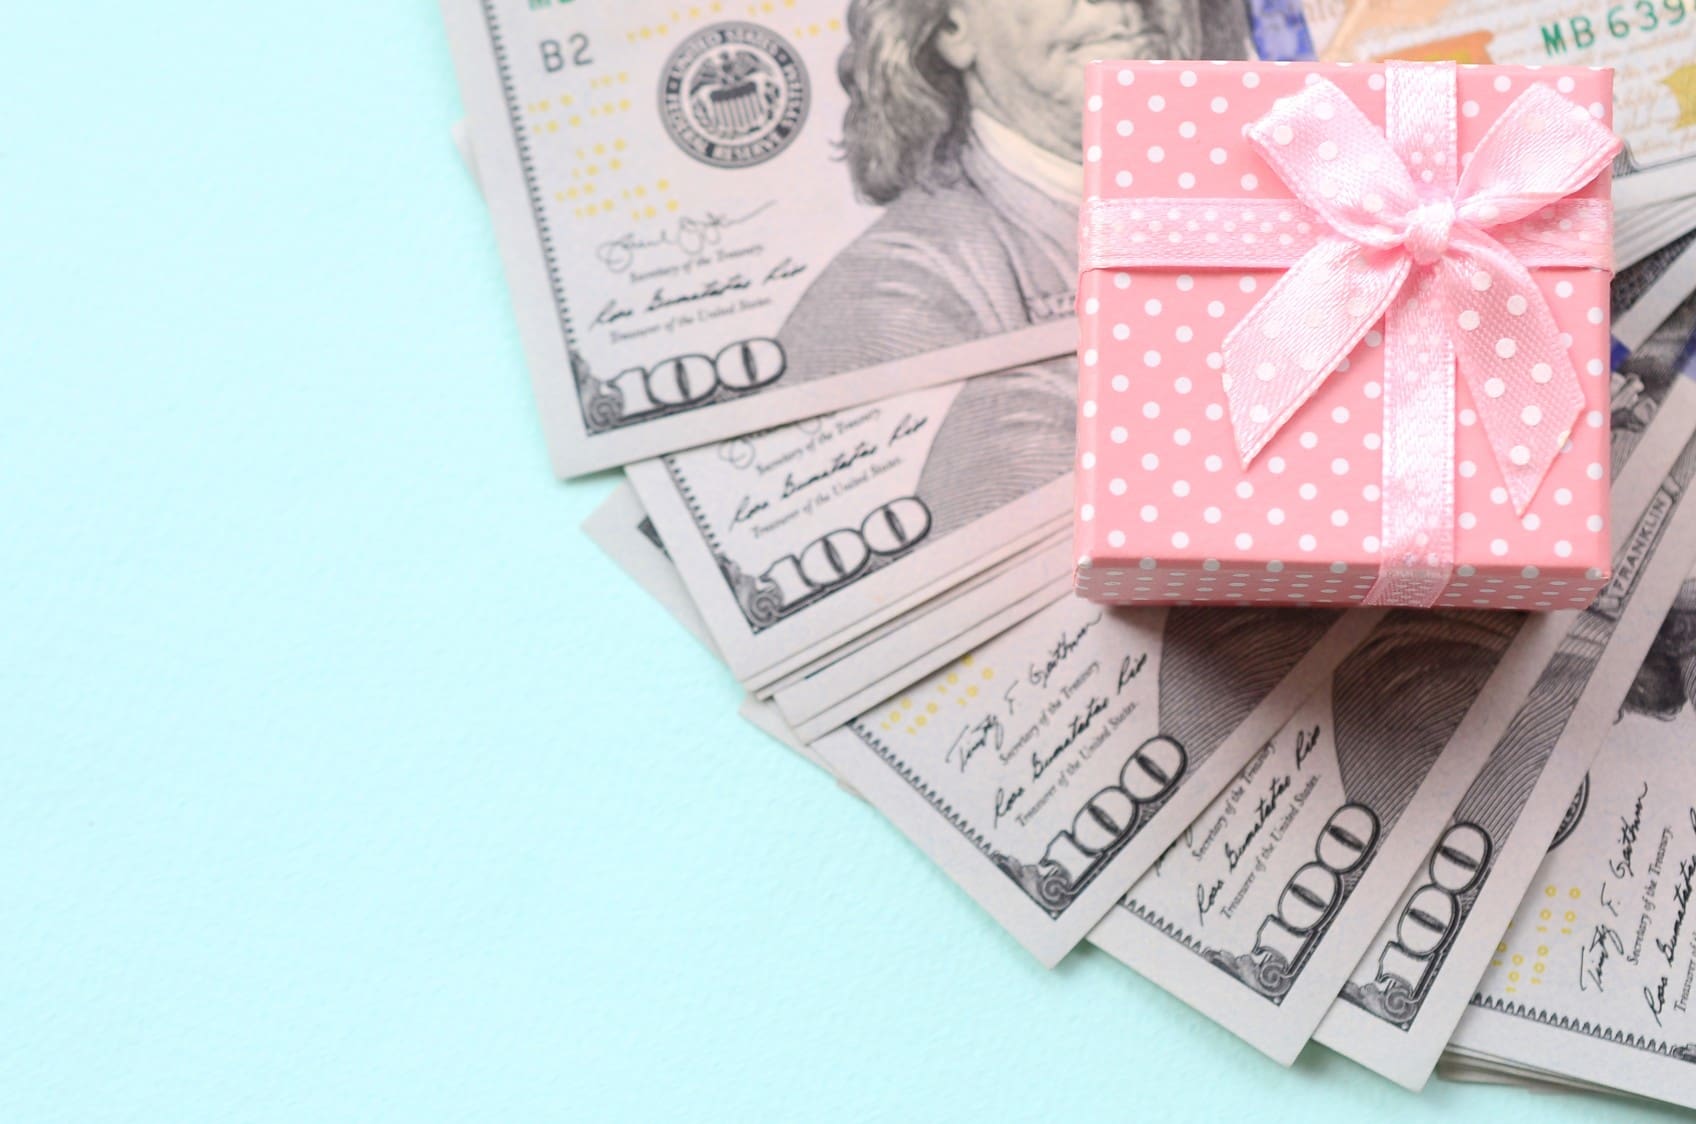 money-gift-box-dollar-cash-bow-white-isolated-present-bill-hundred-paper-currency-finance-ribbon_t20_RzAP8J